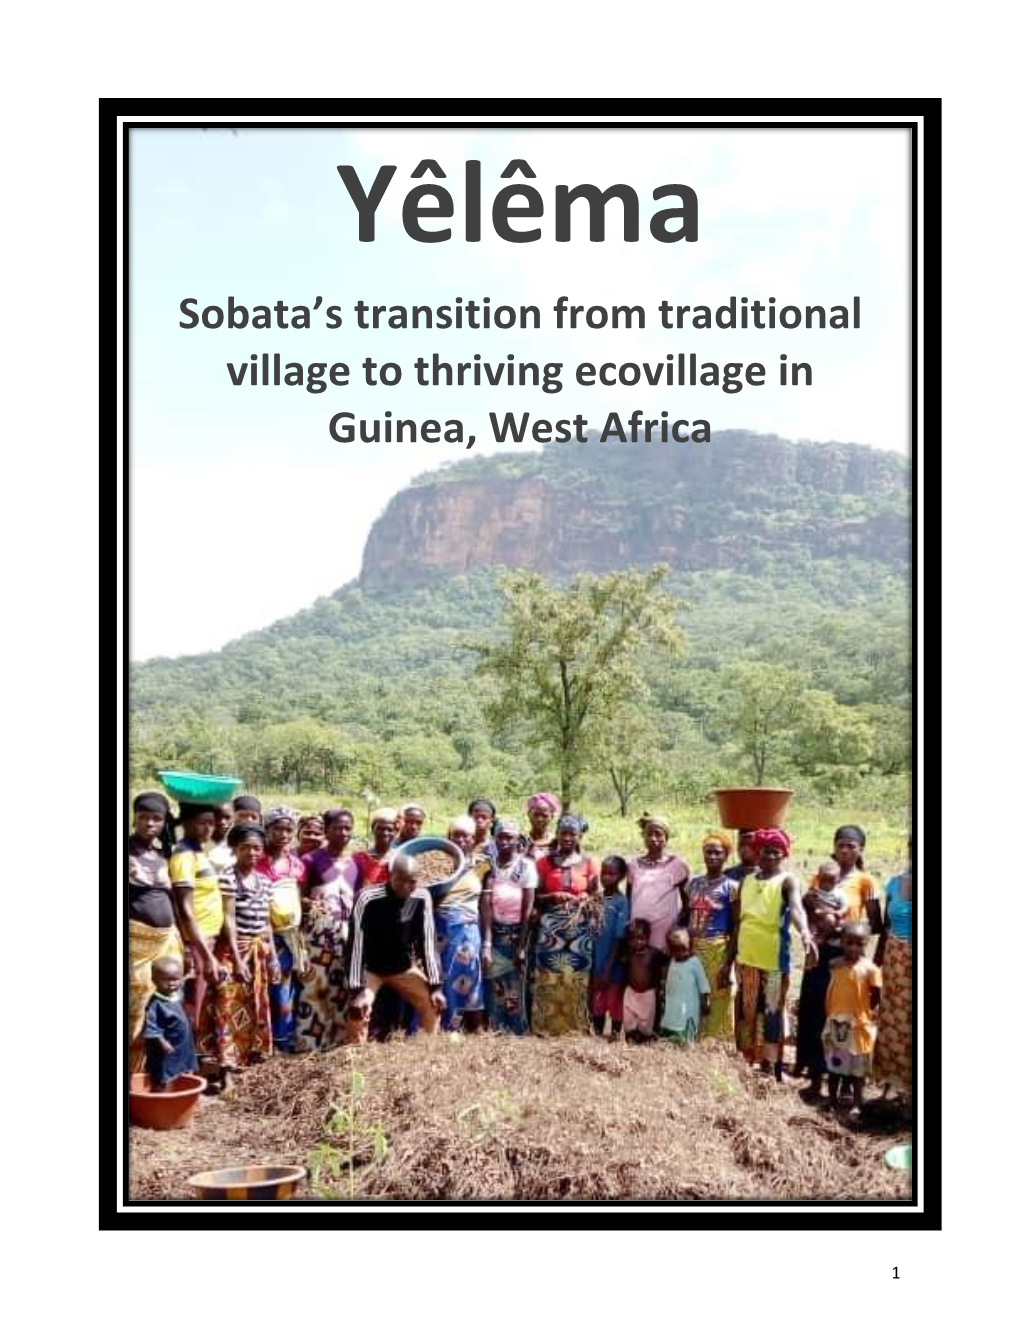 Sobata's Transition from Traditional Village to Thriving Ecovillage In